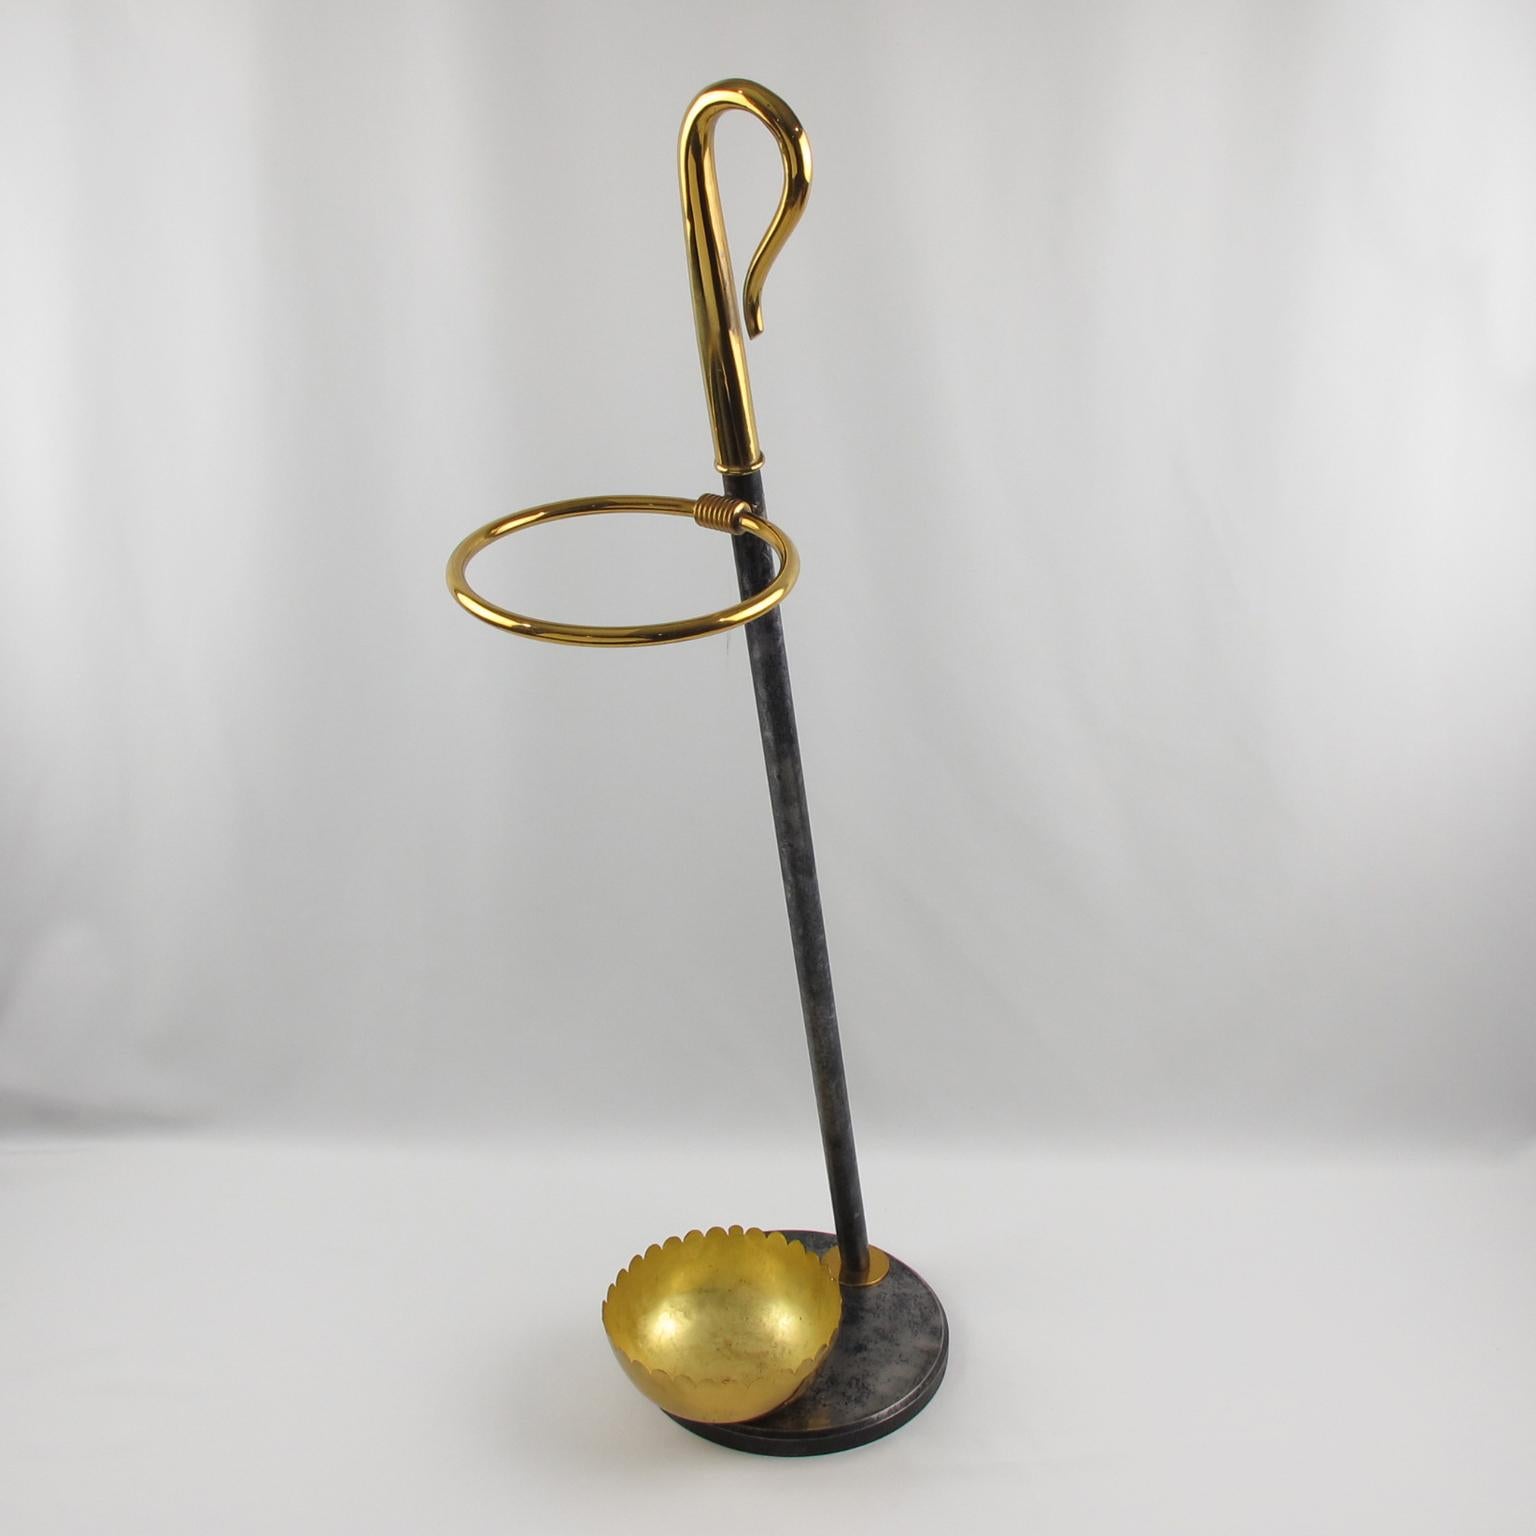 Stunning swan neck shaped umbrella stand reminiscent of the work of Willy Daro. This umbrella stand has a heavy cast iron base with a gilded brass bowl. The body of the umbrella stand is off-axis with polished brass and same cast iron with unique